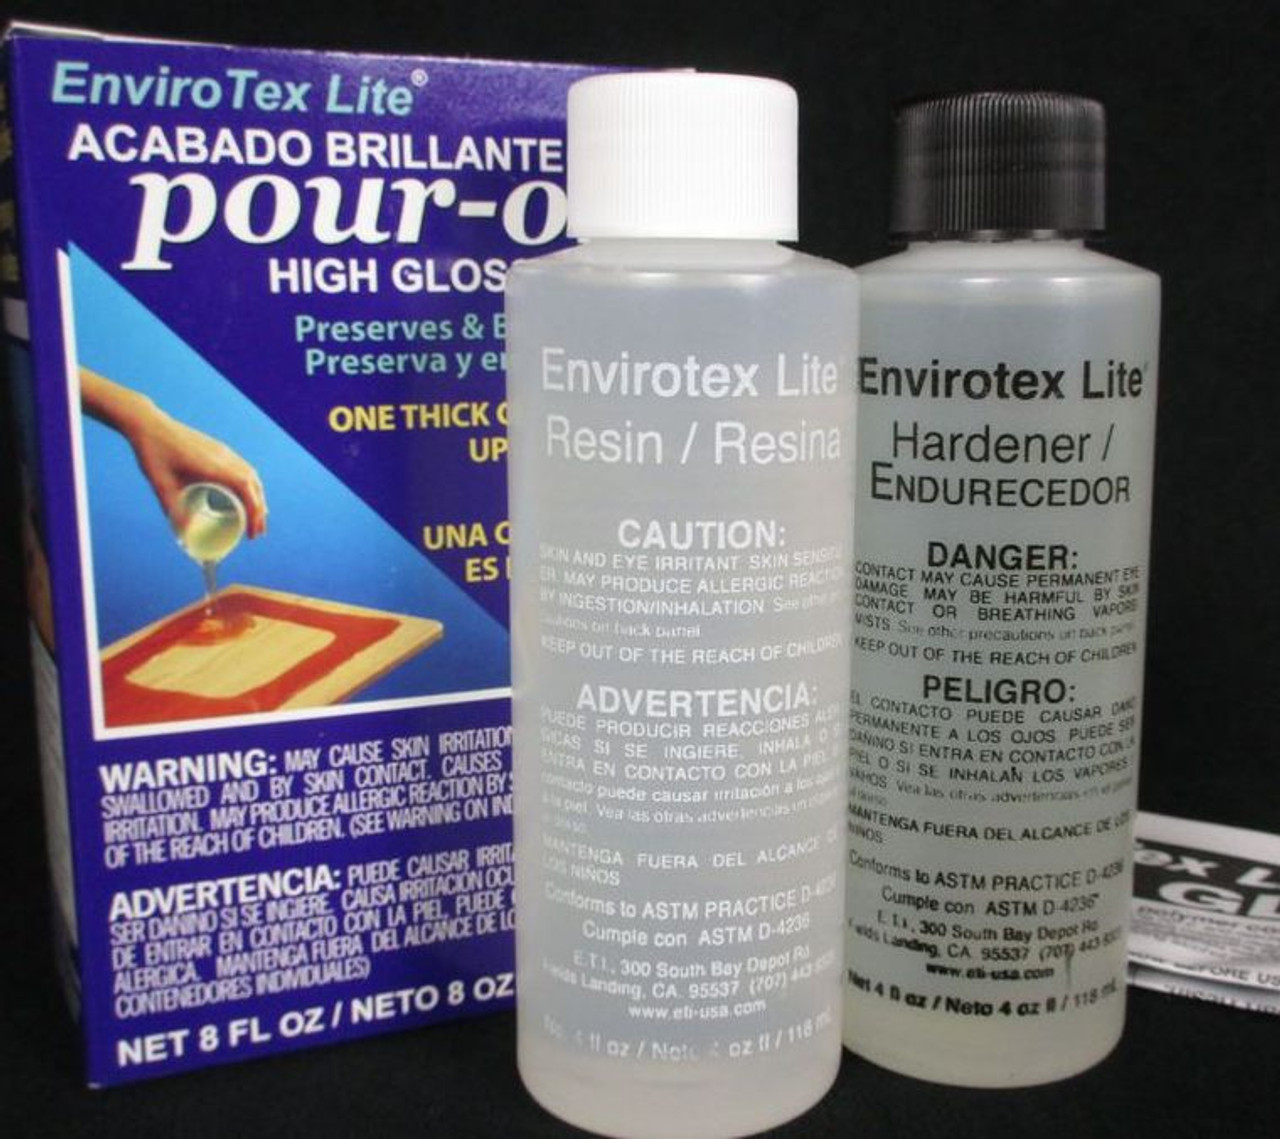 EnviroTex Lite Pour-On High Gloss Finish